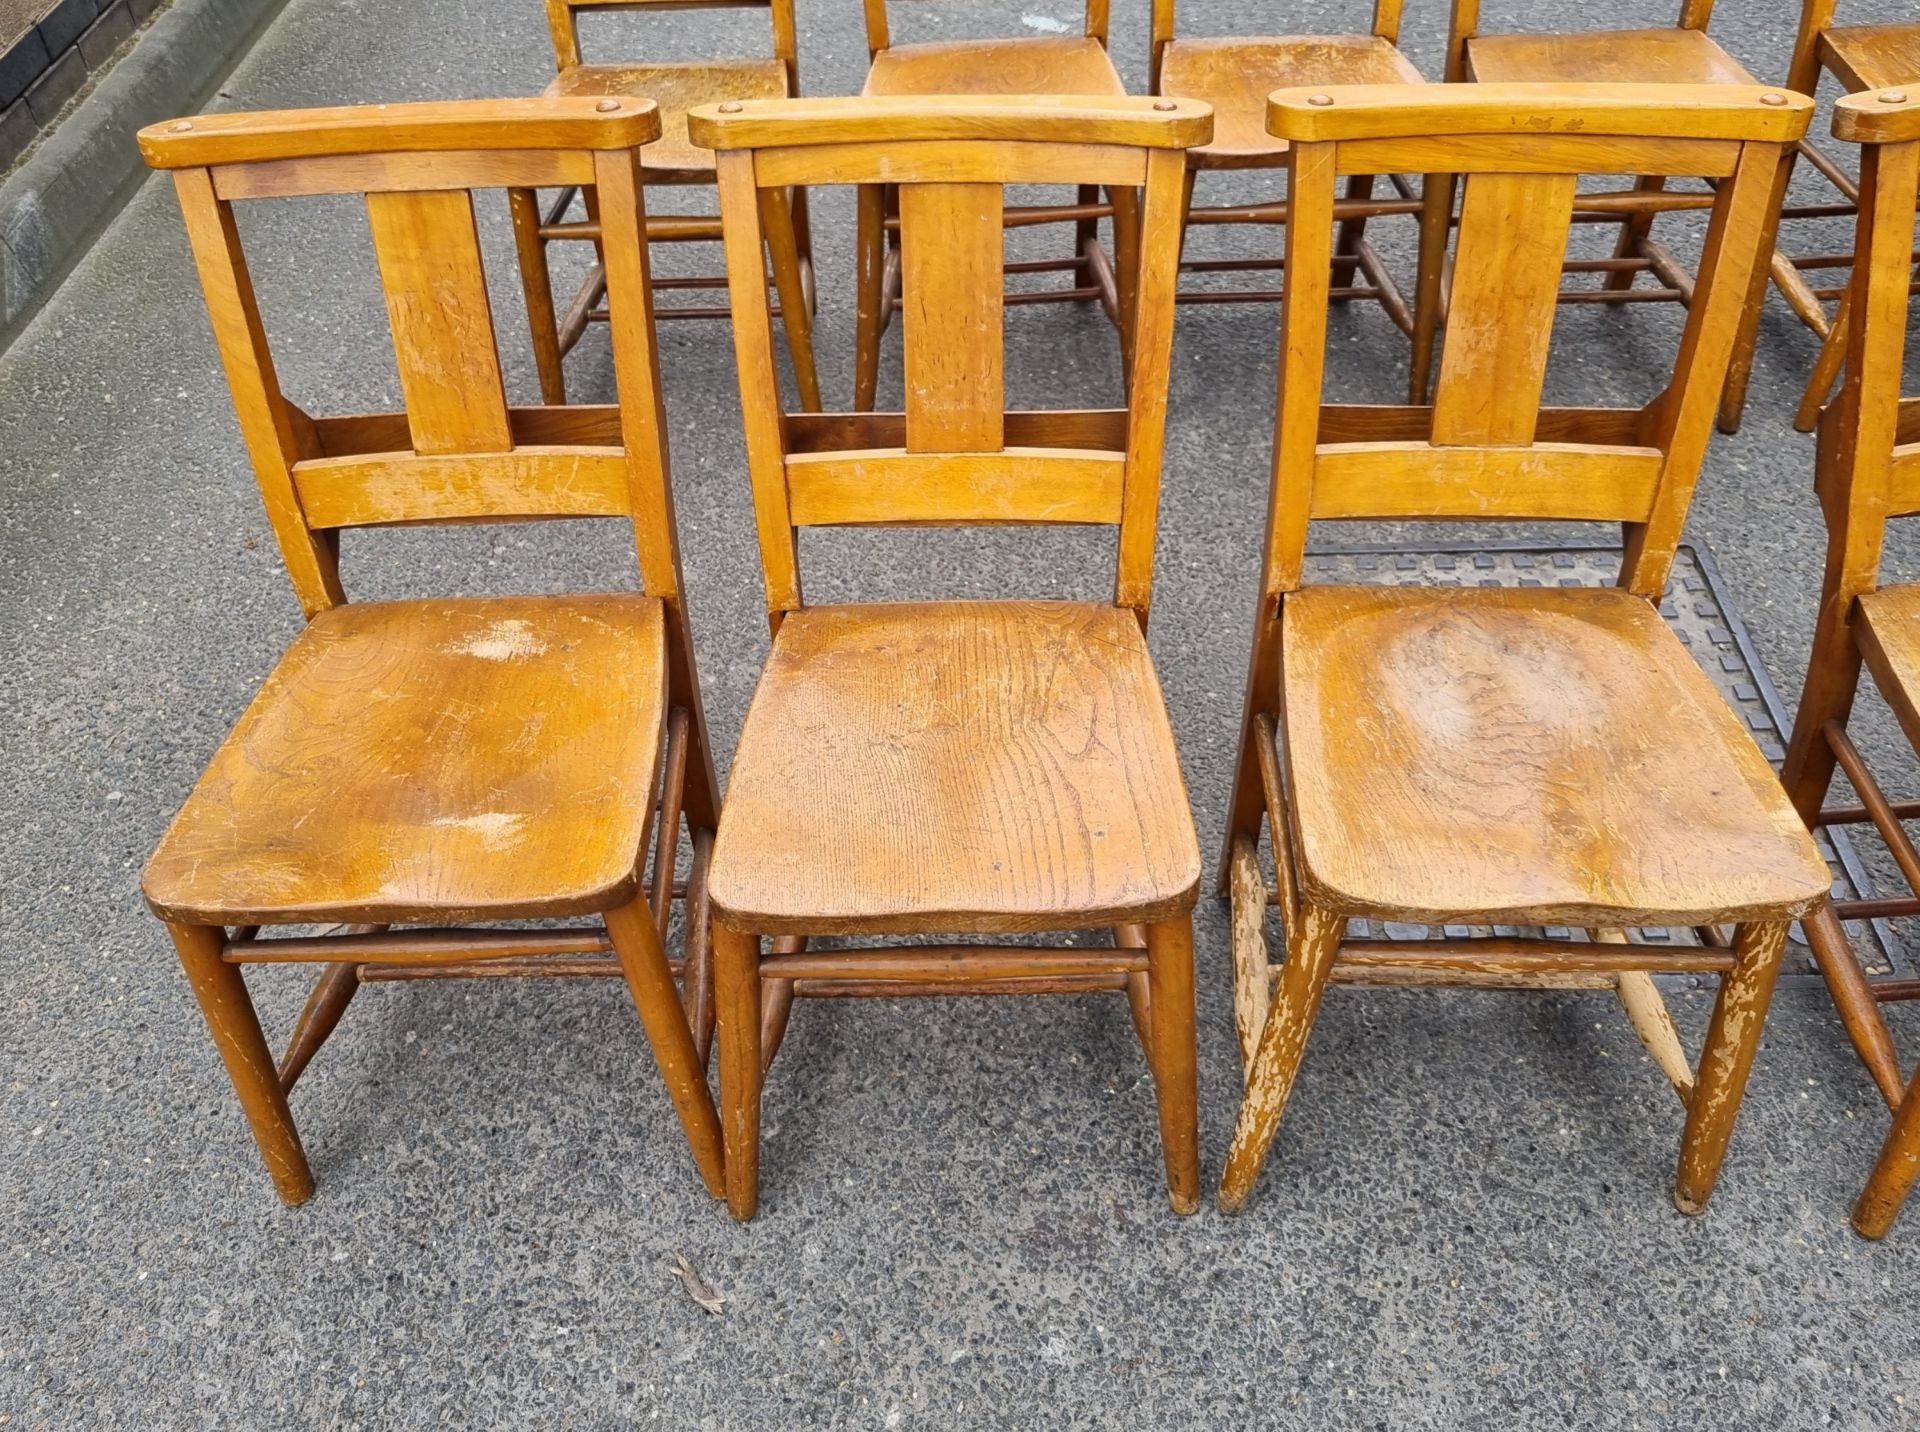 12x Wooden chairs with rear book holder - L 420 x W 420 x H 820mm - Image 7 of 10